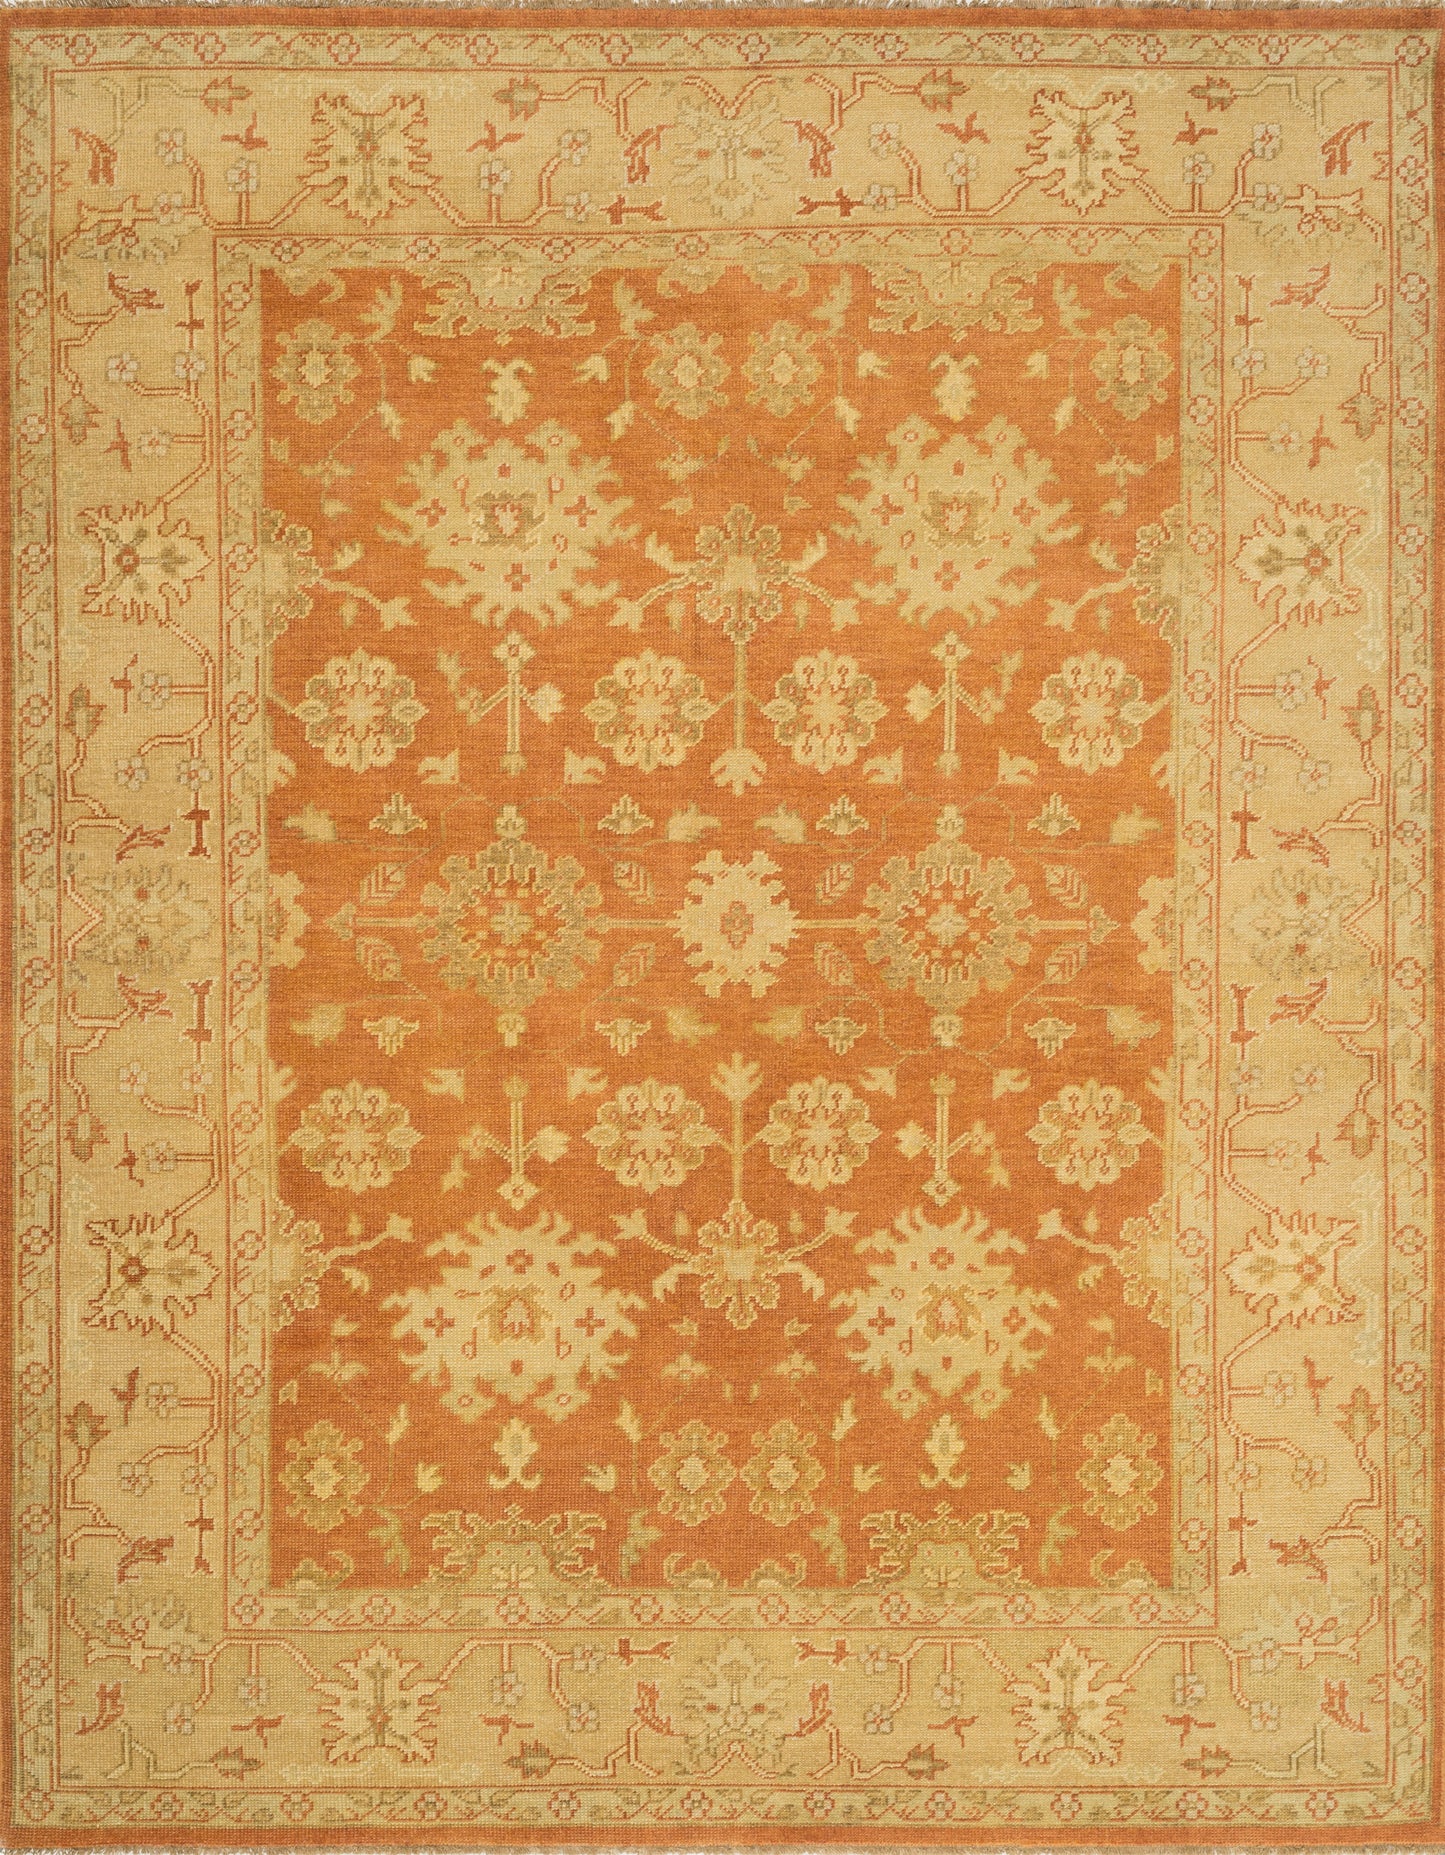 Vernon ED Wool Indoor Area Rug from Loloi